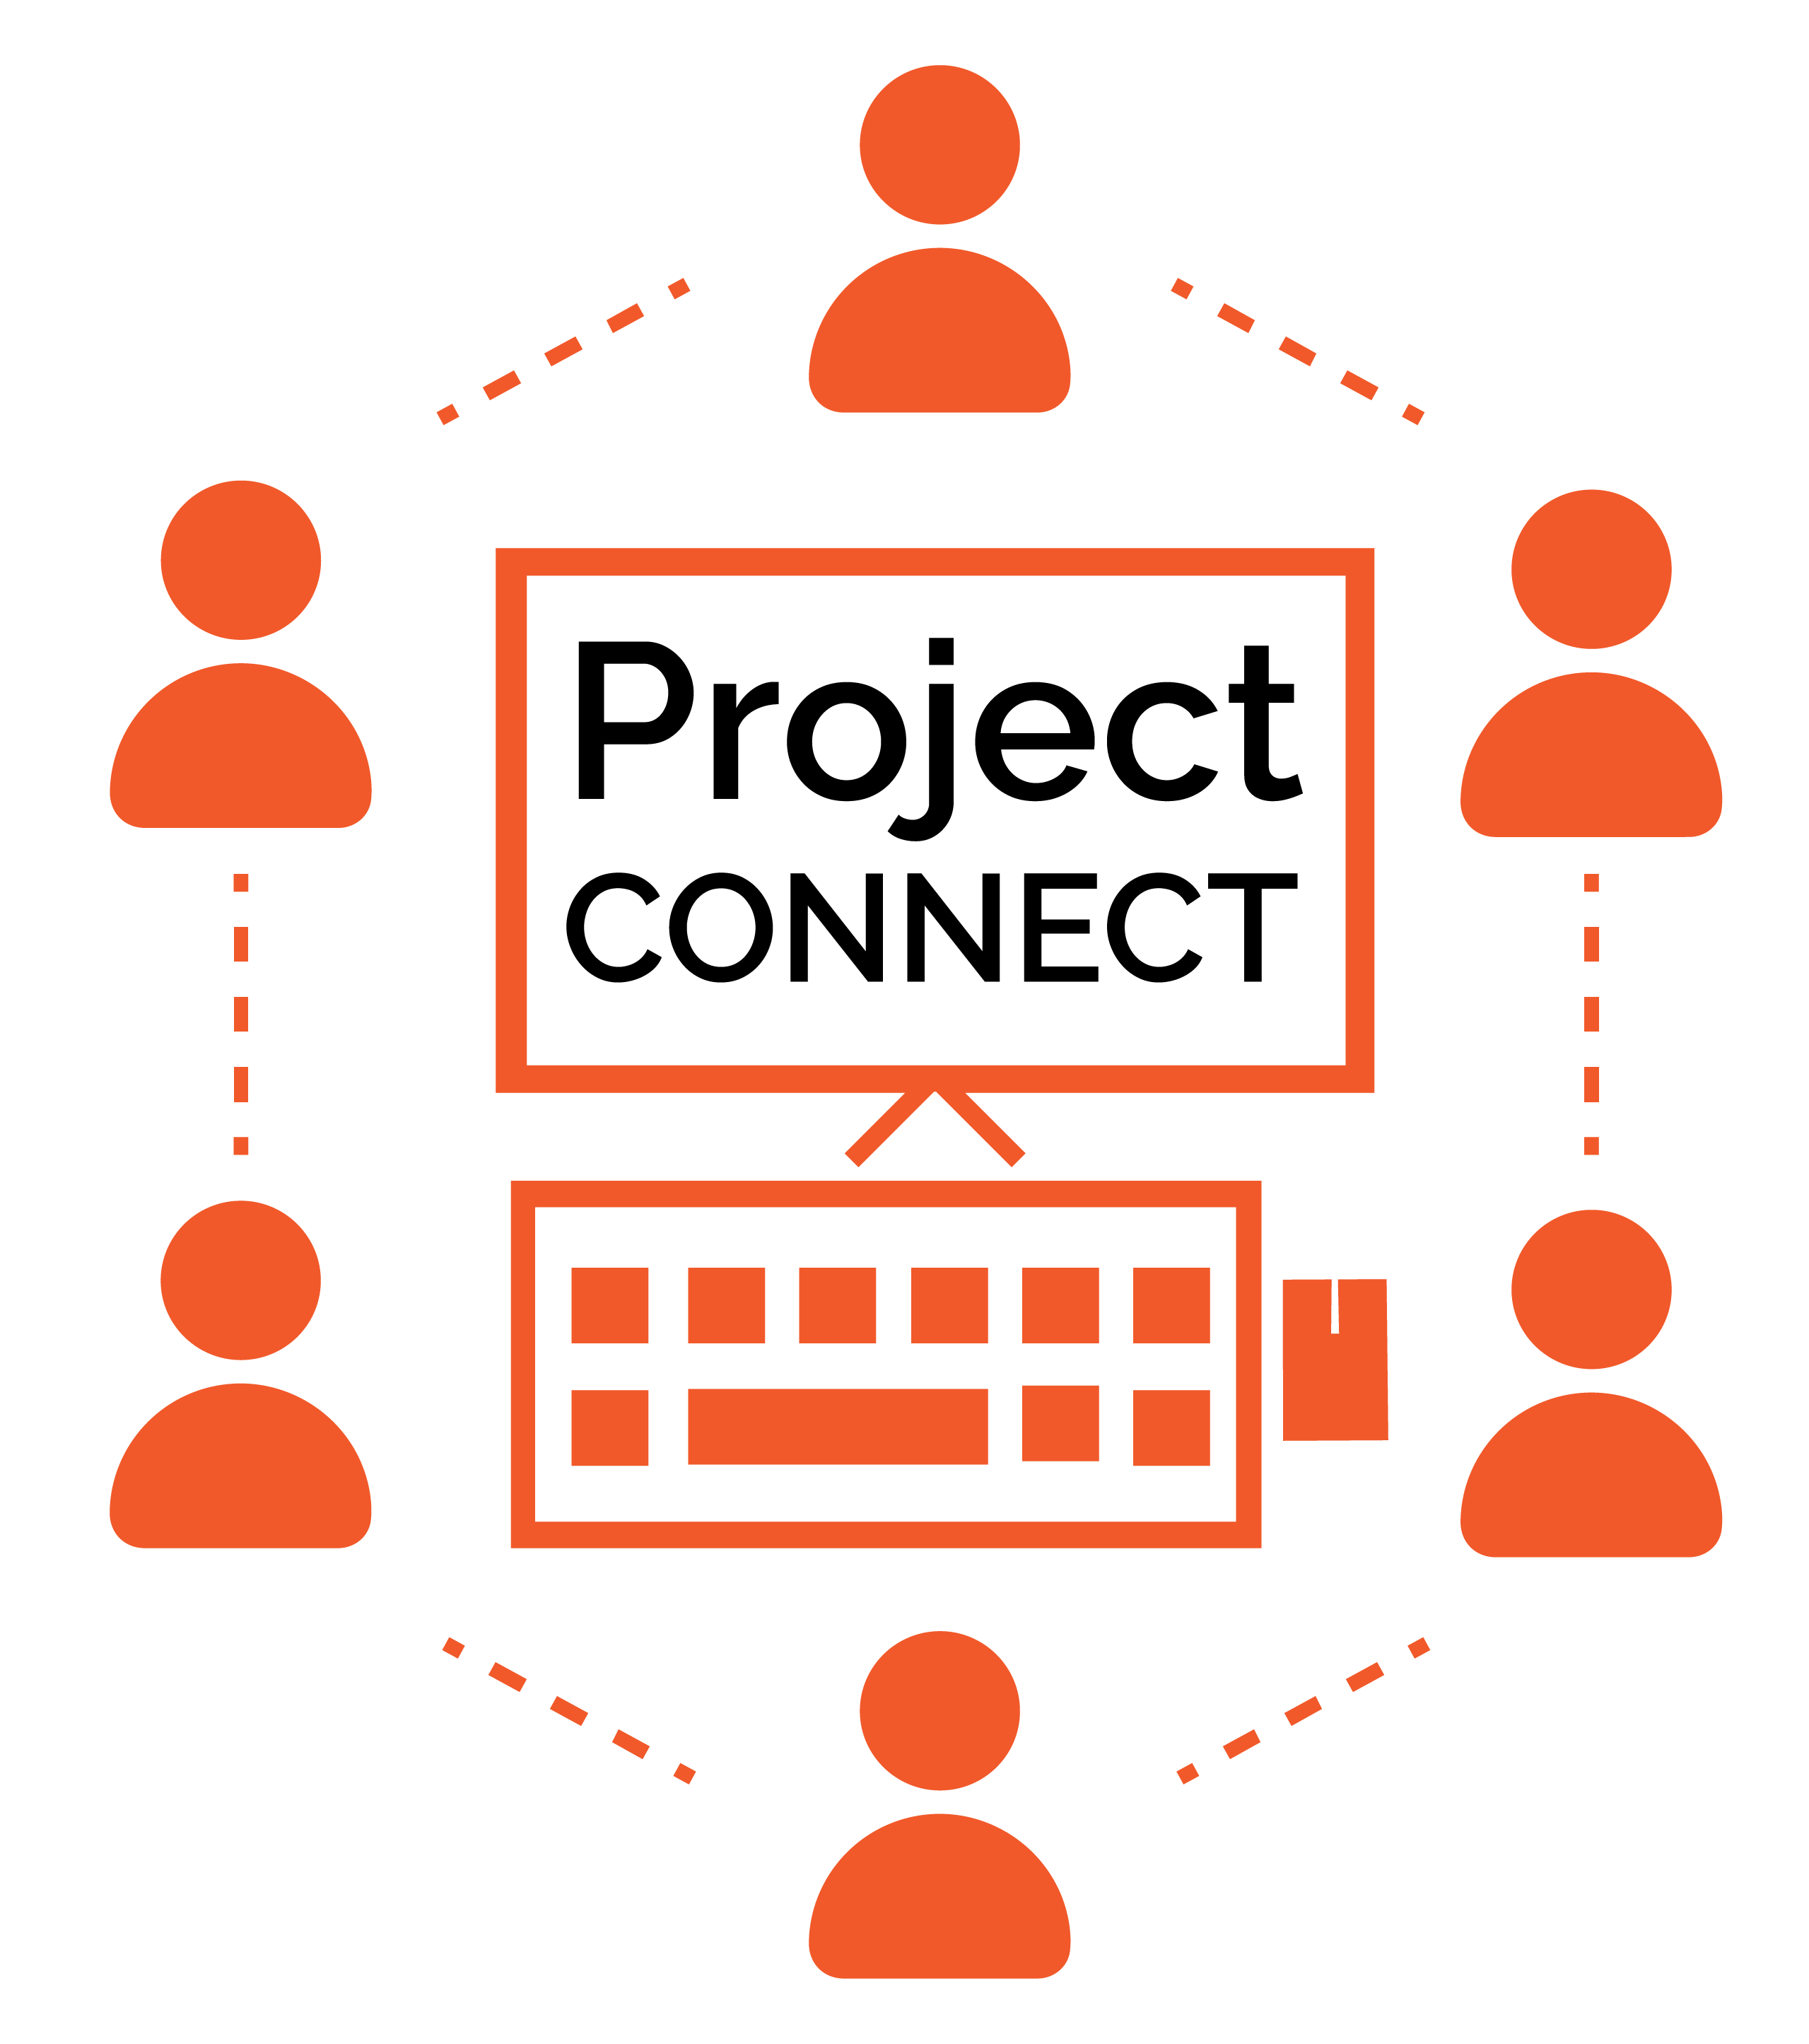 Project CONNECT logo